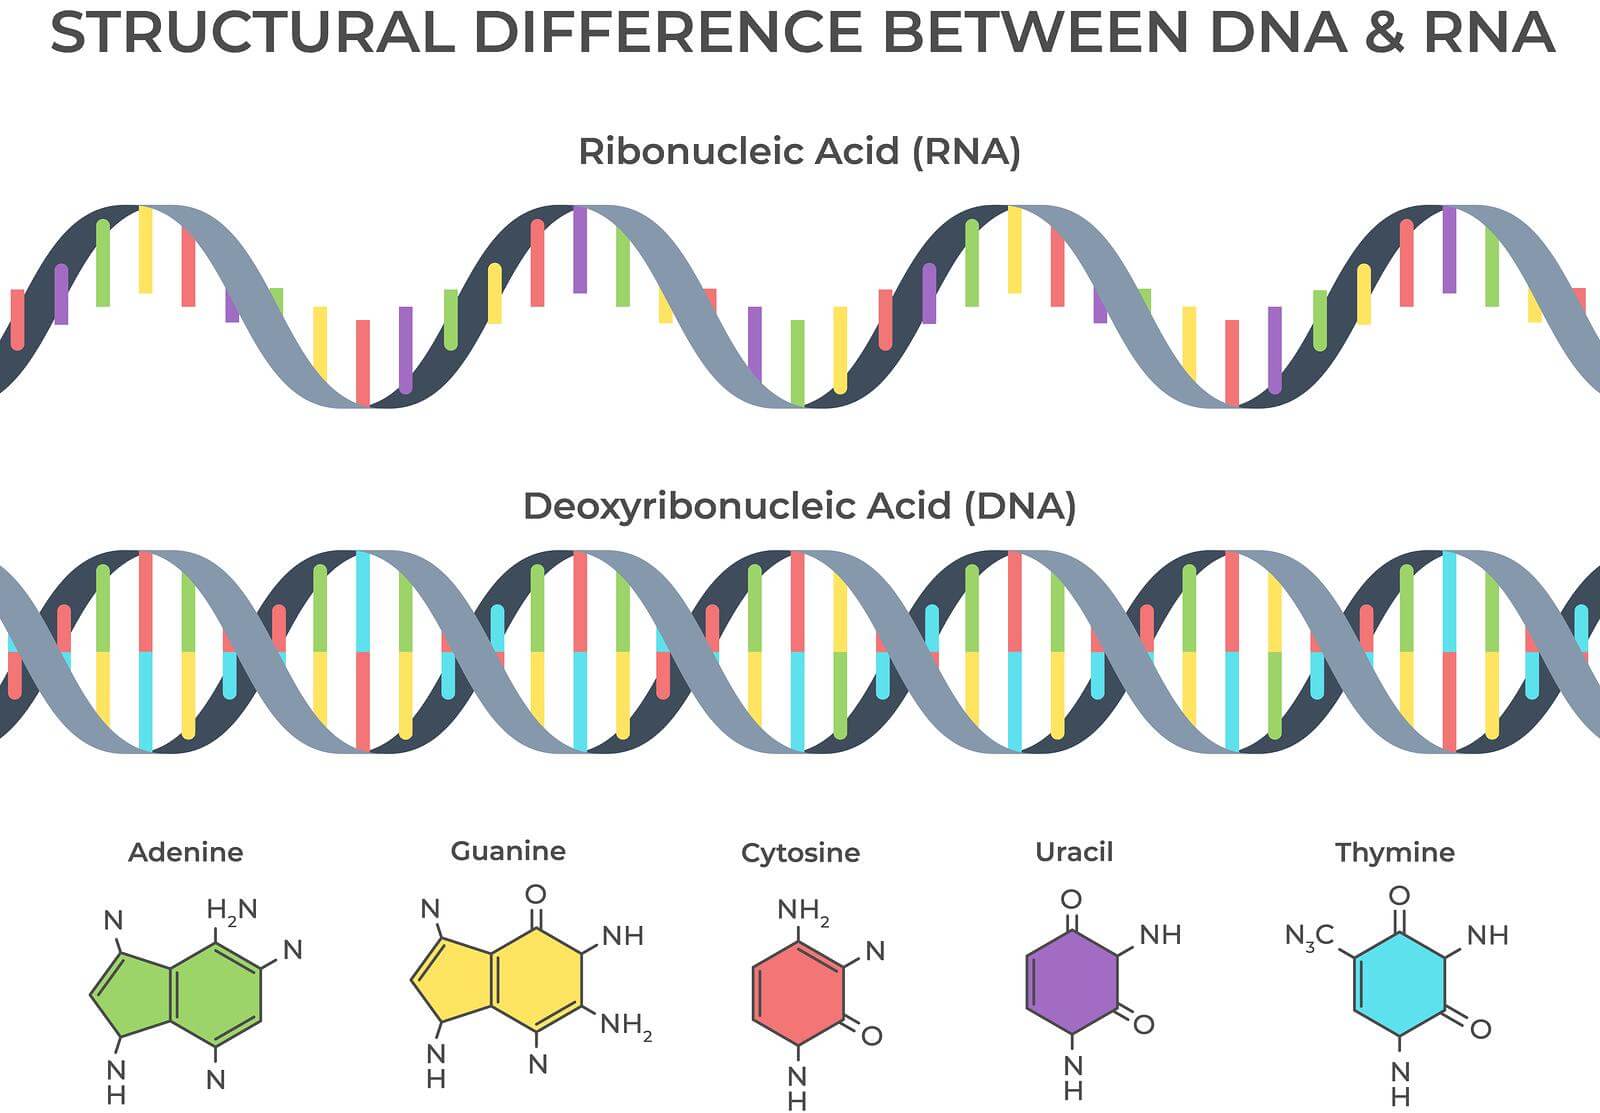 Picture showing molecules that make up DNA and RNA - the genetic material guiding all life-forms